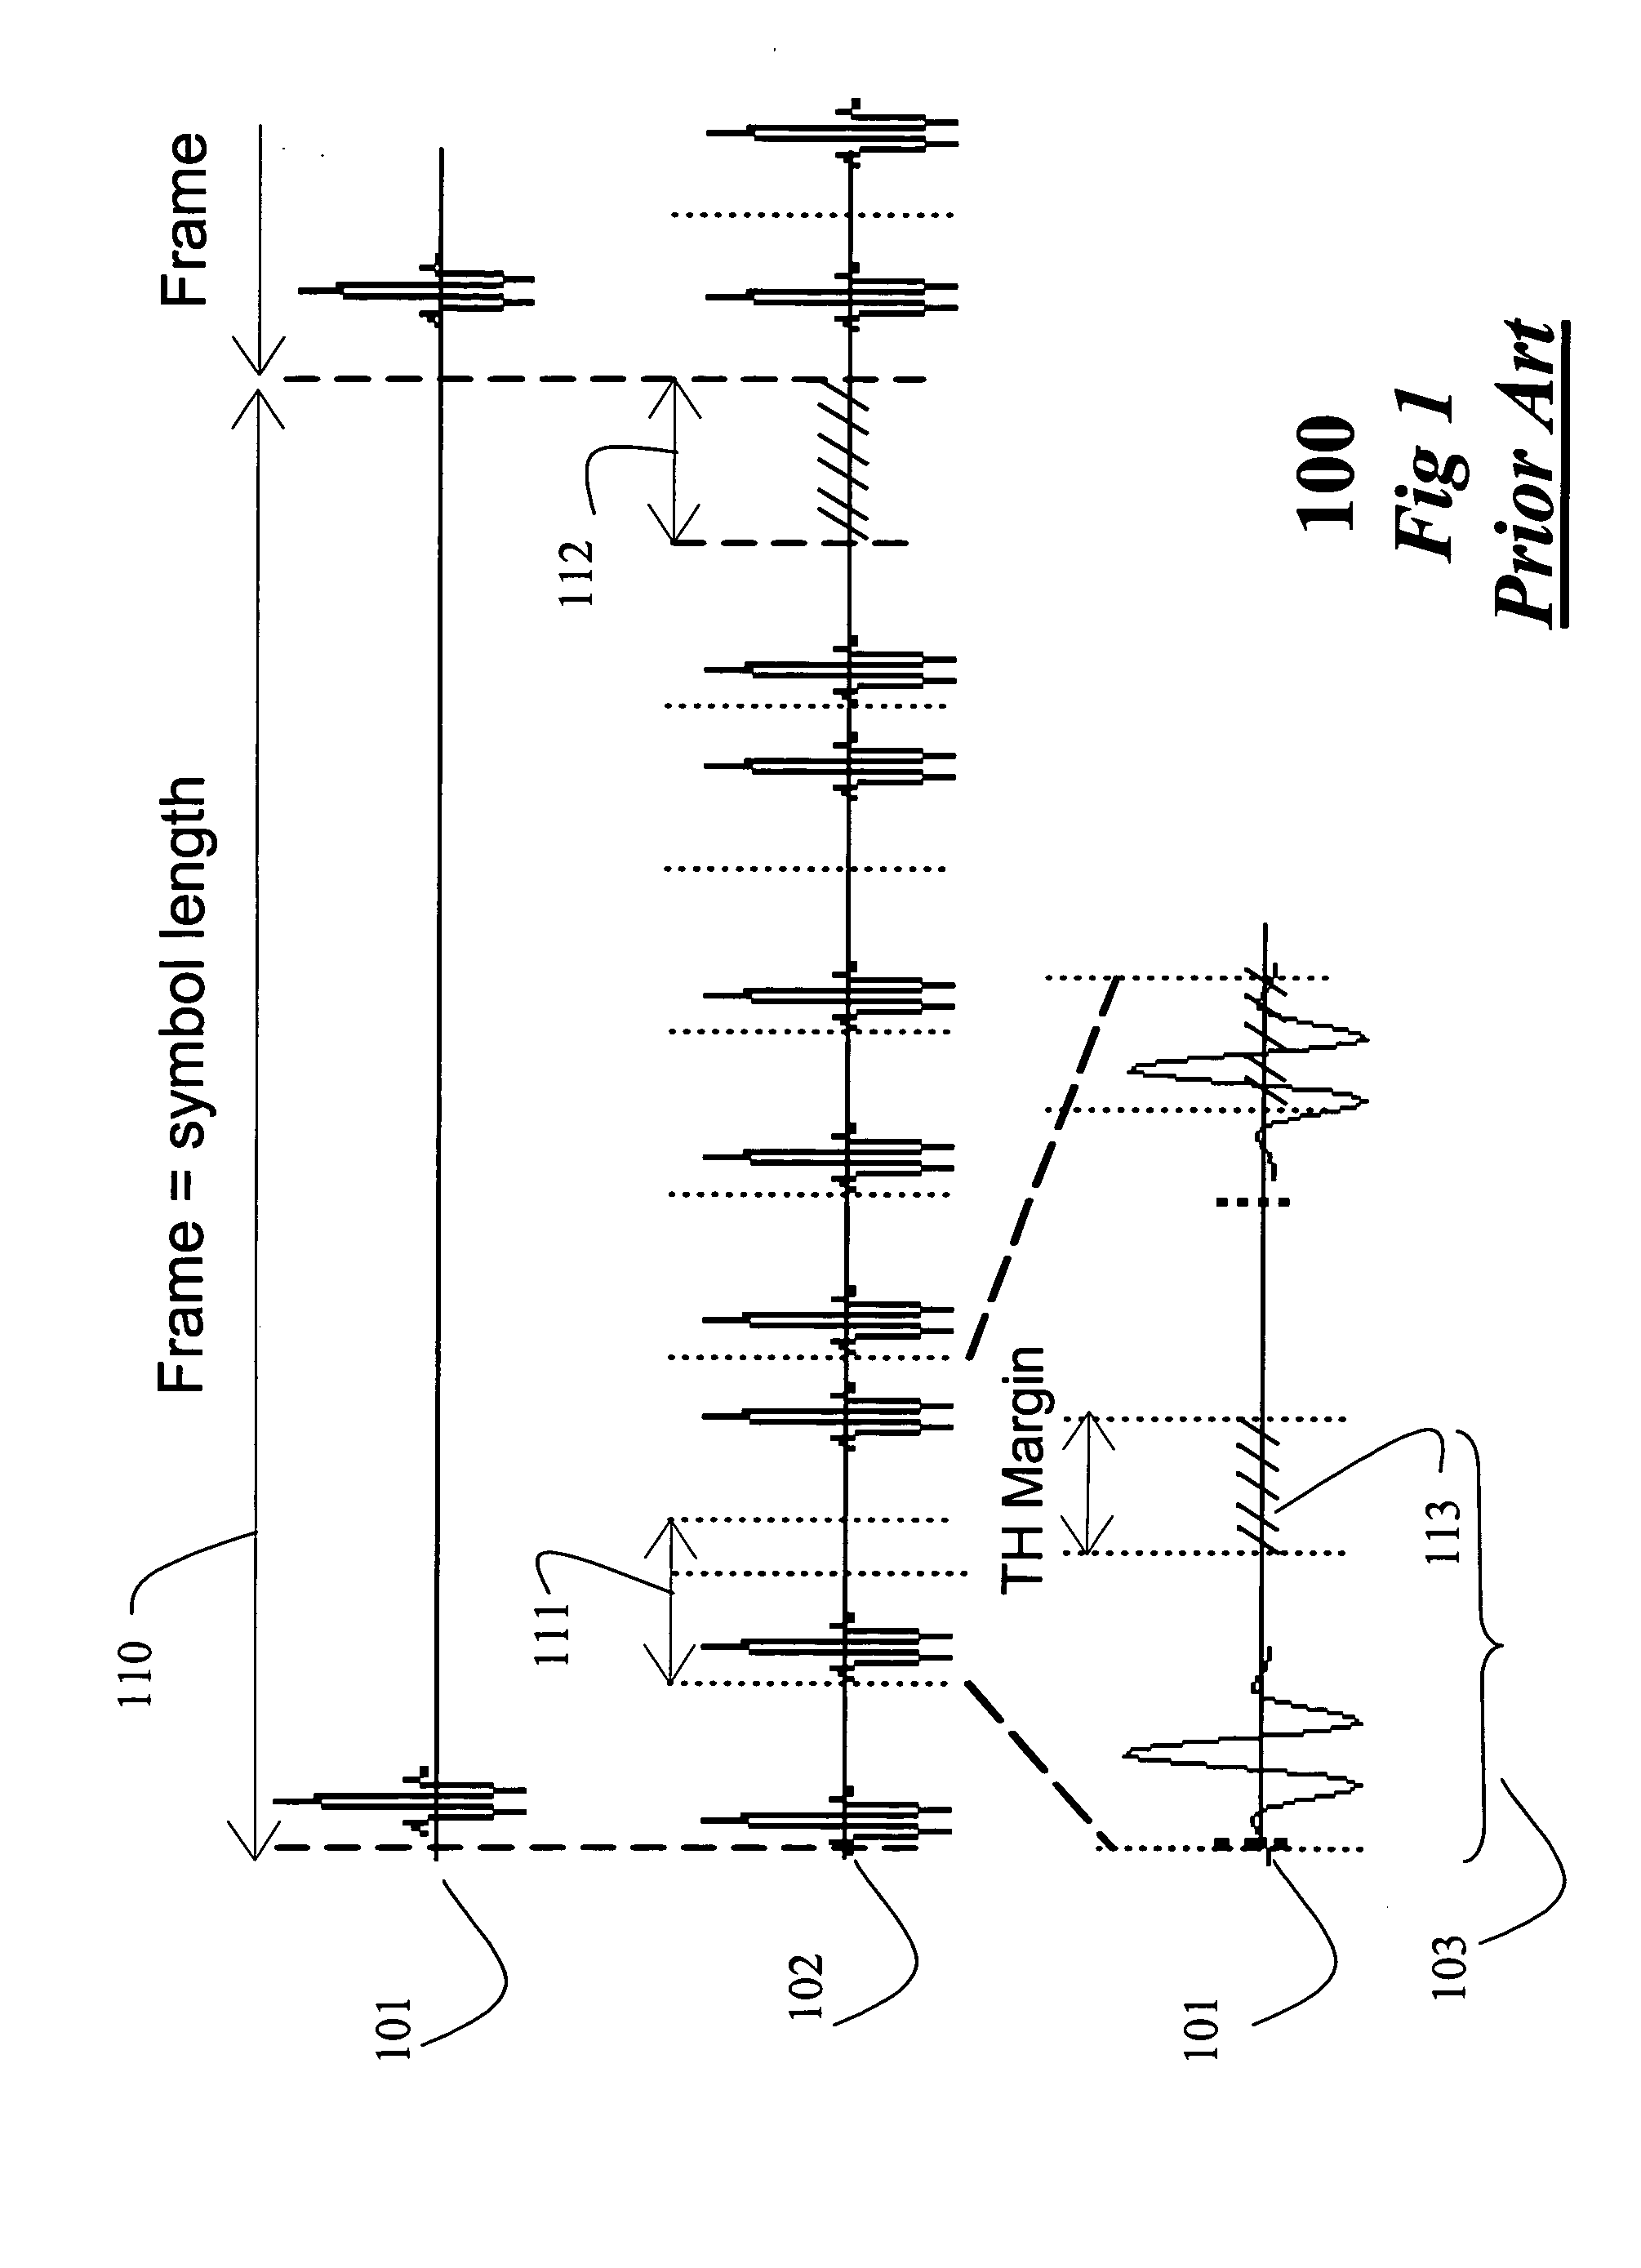 Randomly changing pulse polarity and phase in an UWB signal for power spectrum density shaping